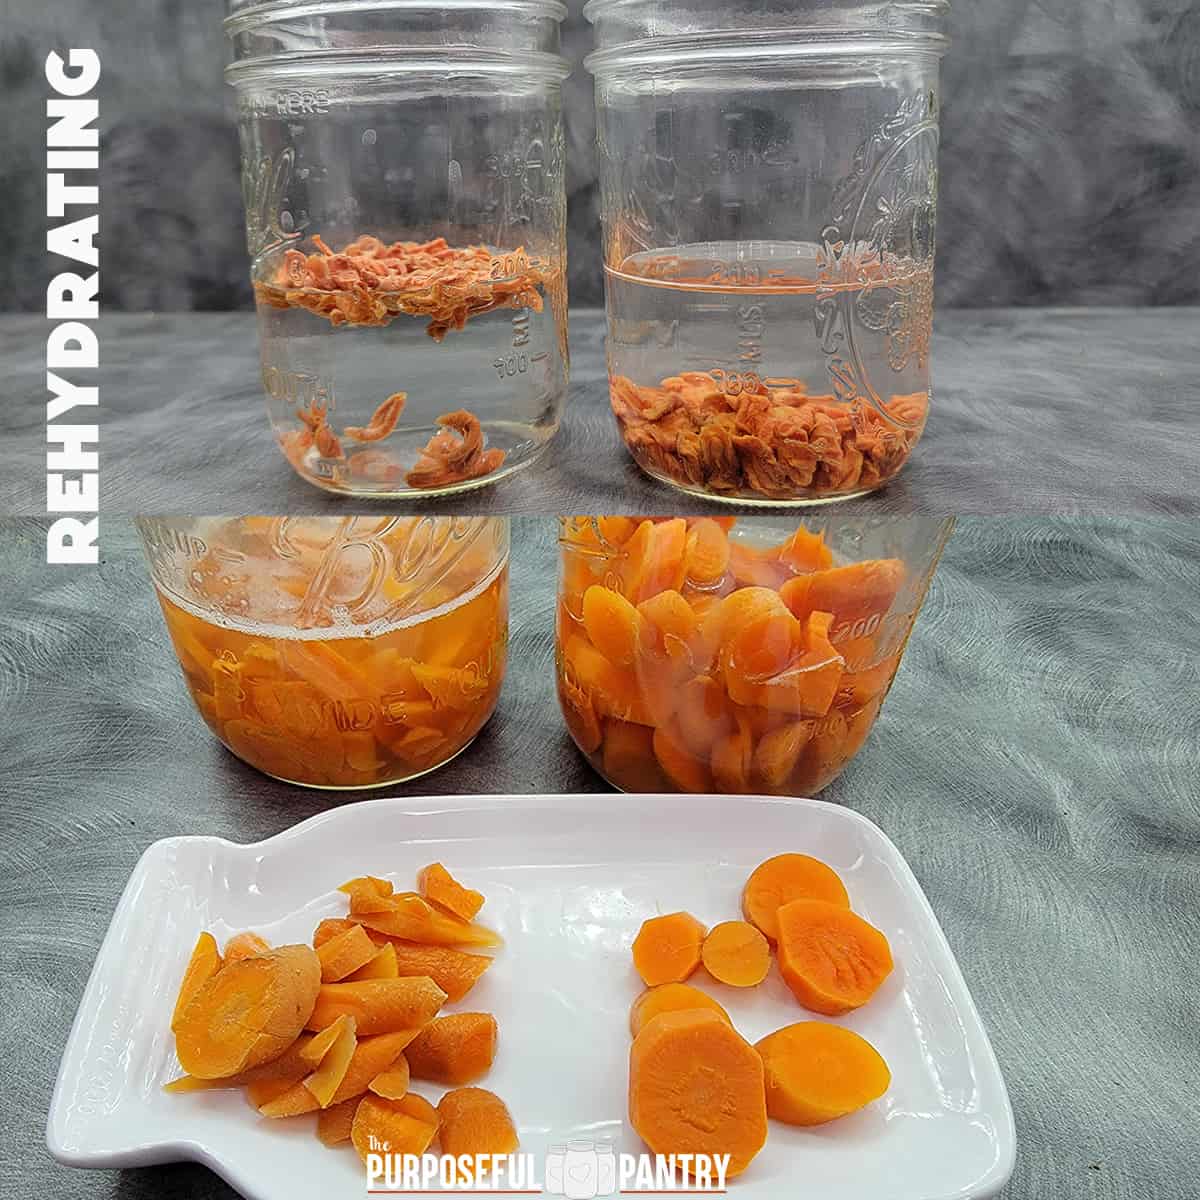 Dehydrated carrots being rehydrated